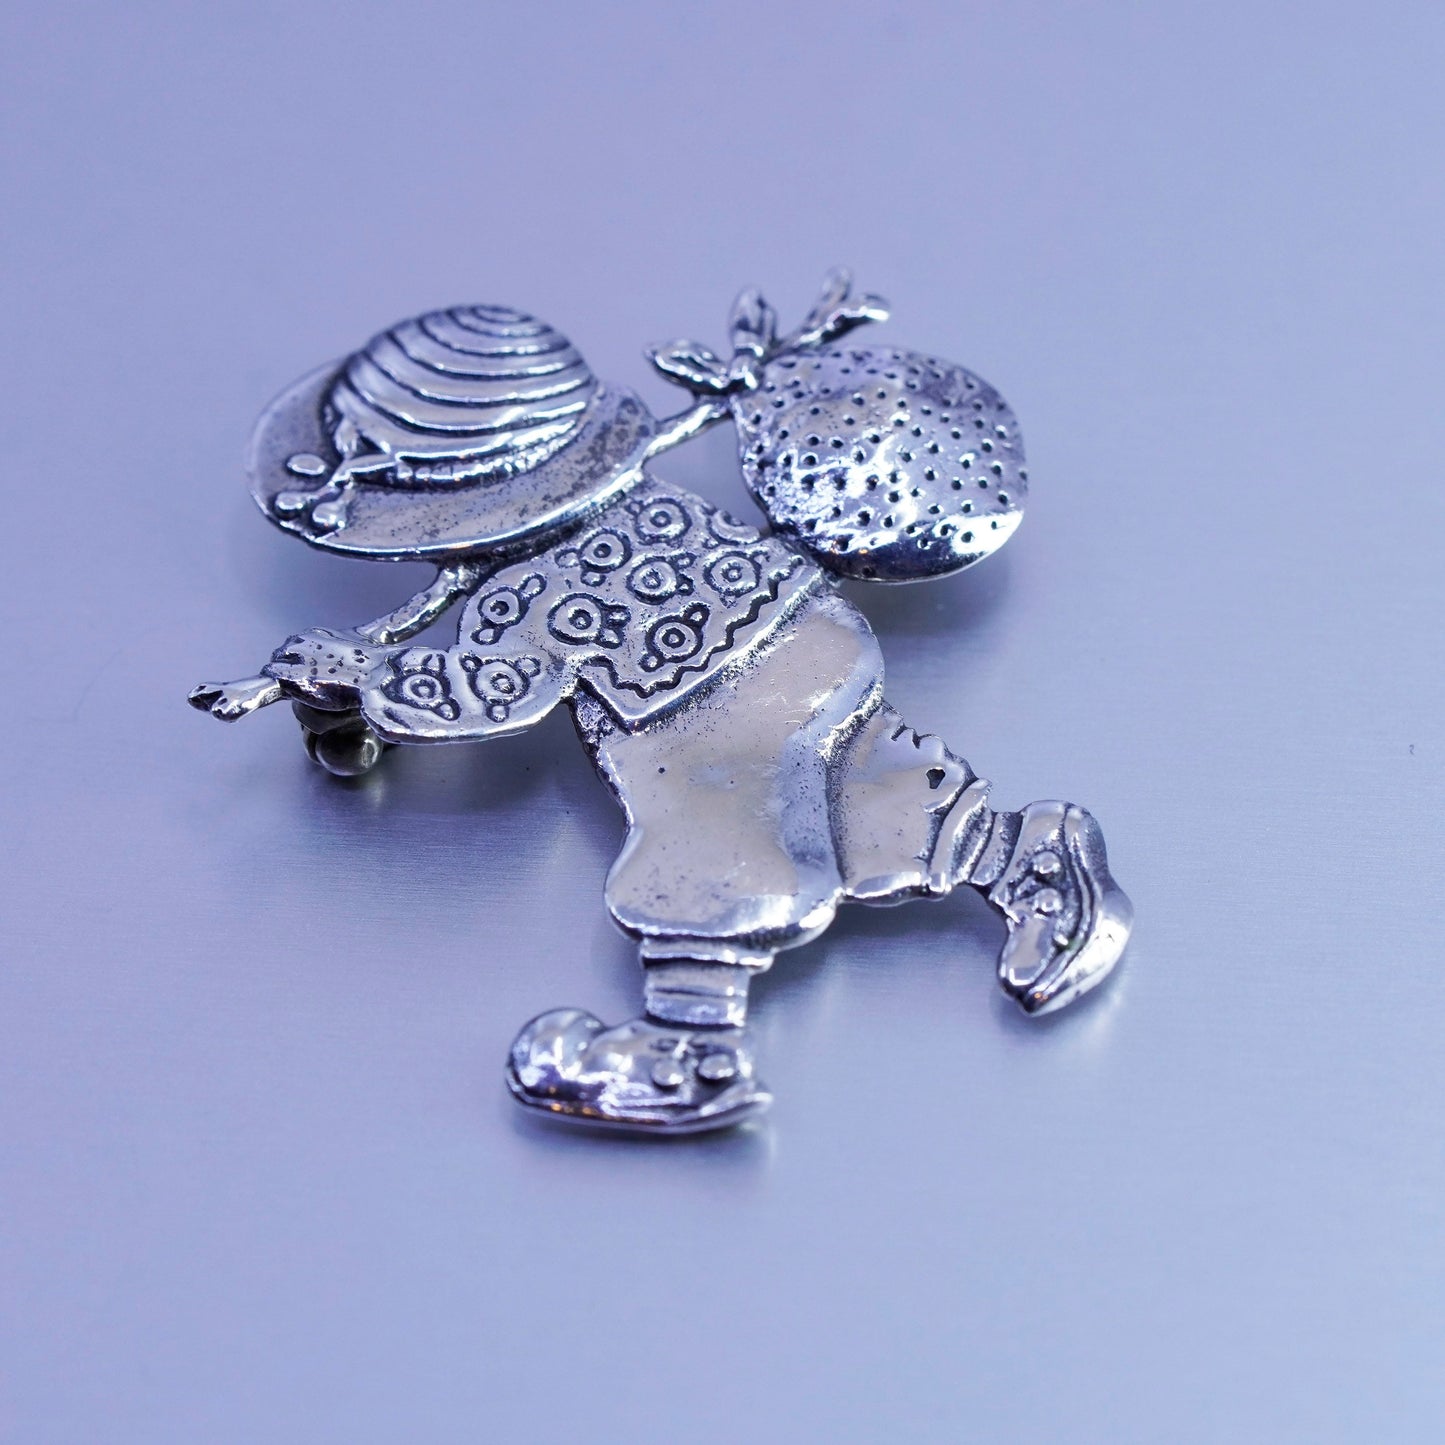 Mary Engelbreit Me Ink Little Girl with watering can Sterling 925 Silver Brooch